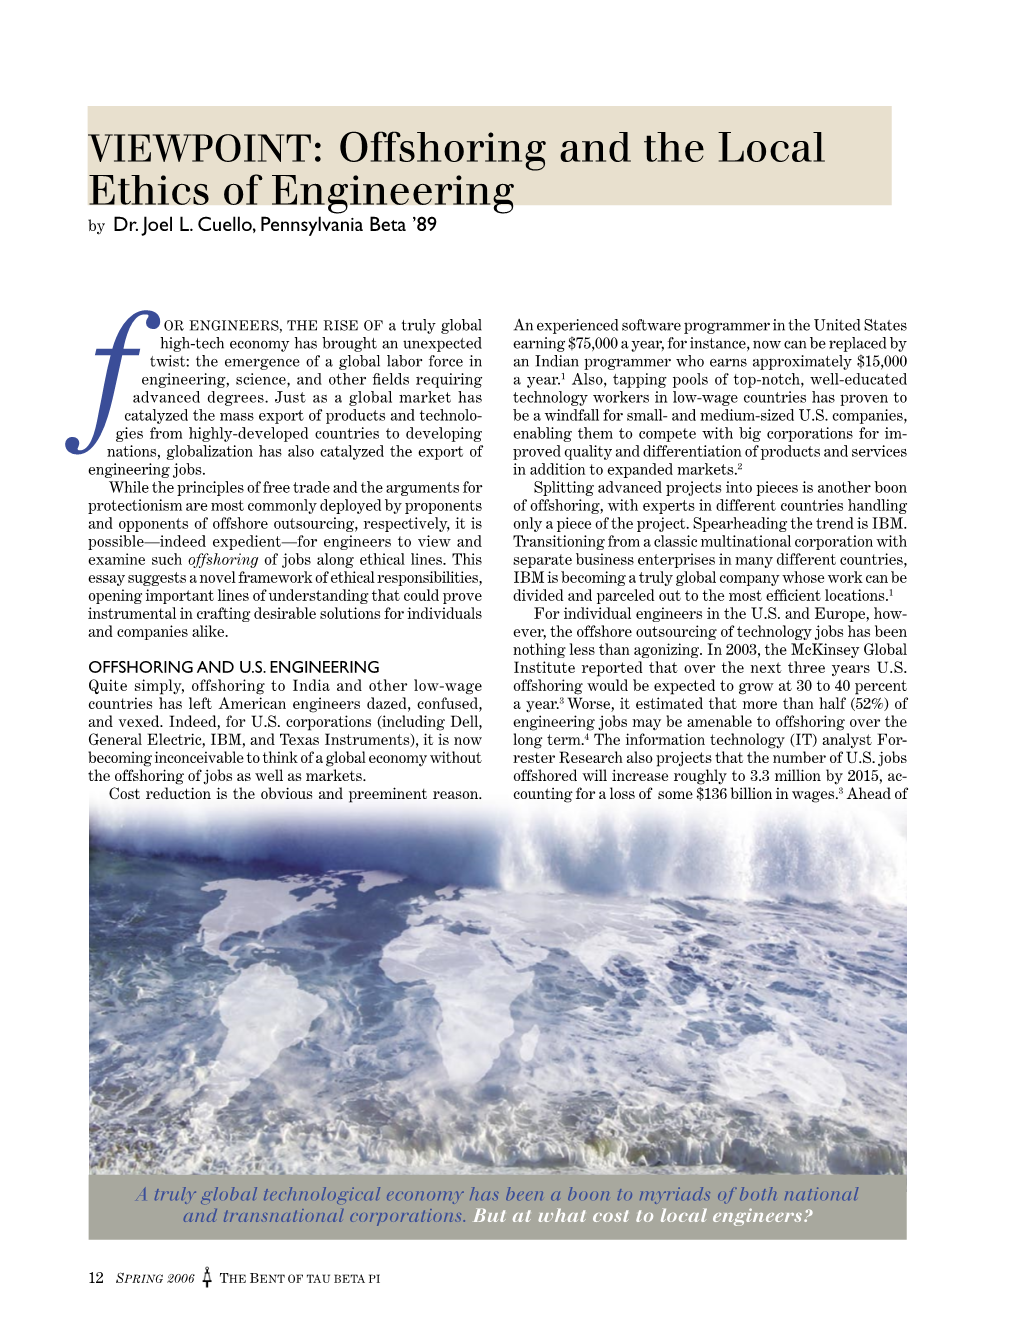 Offshoring and the Local Ethics of Engineering by Dr